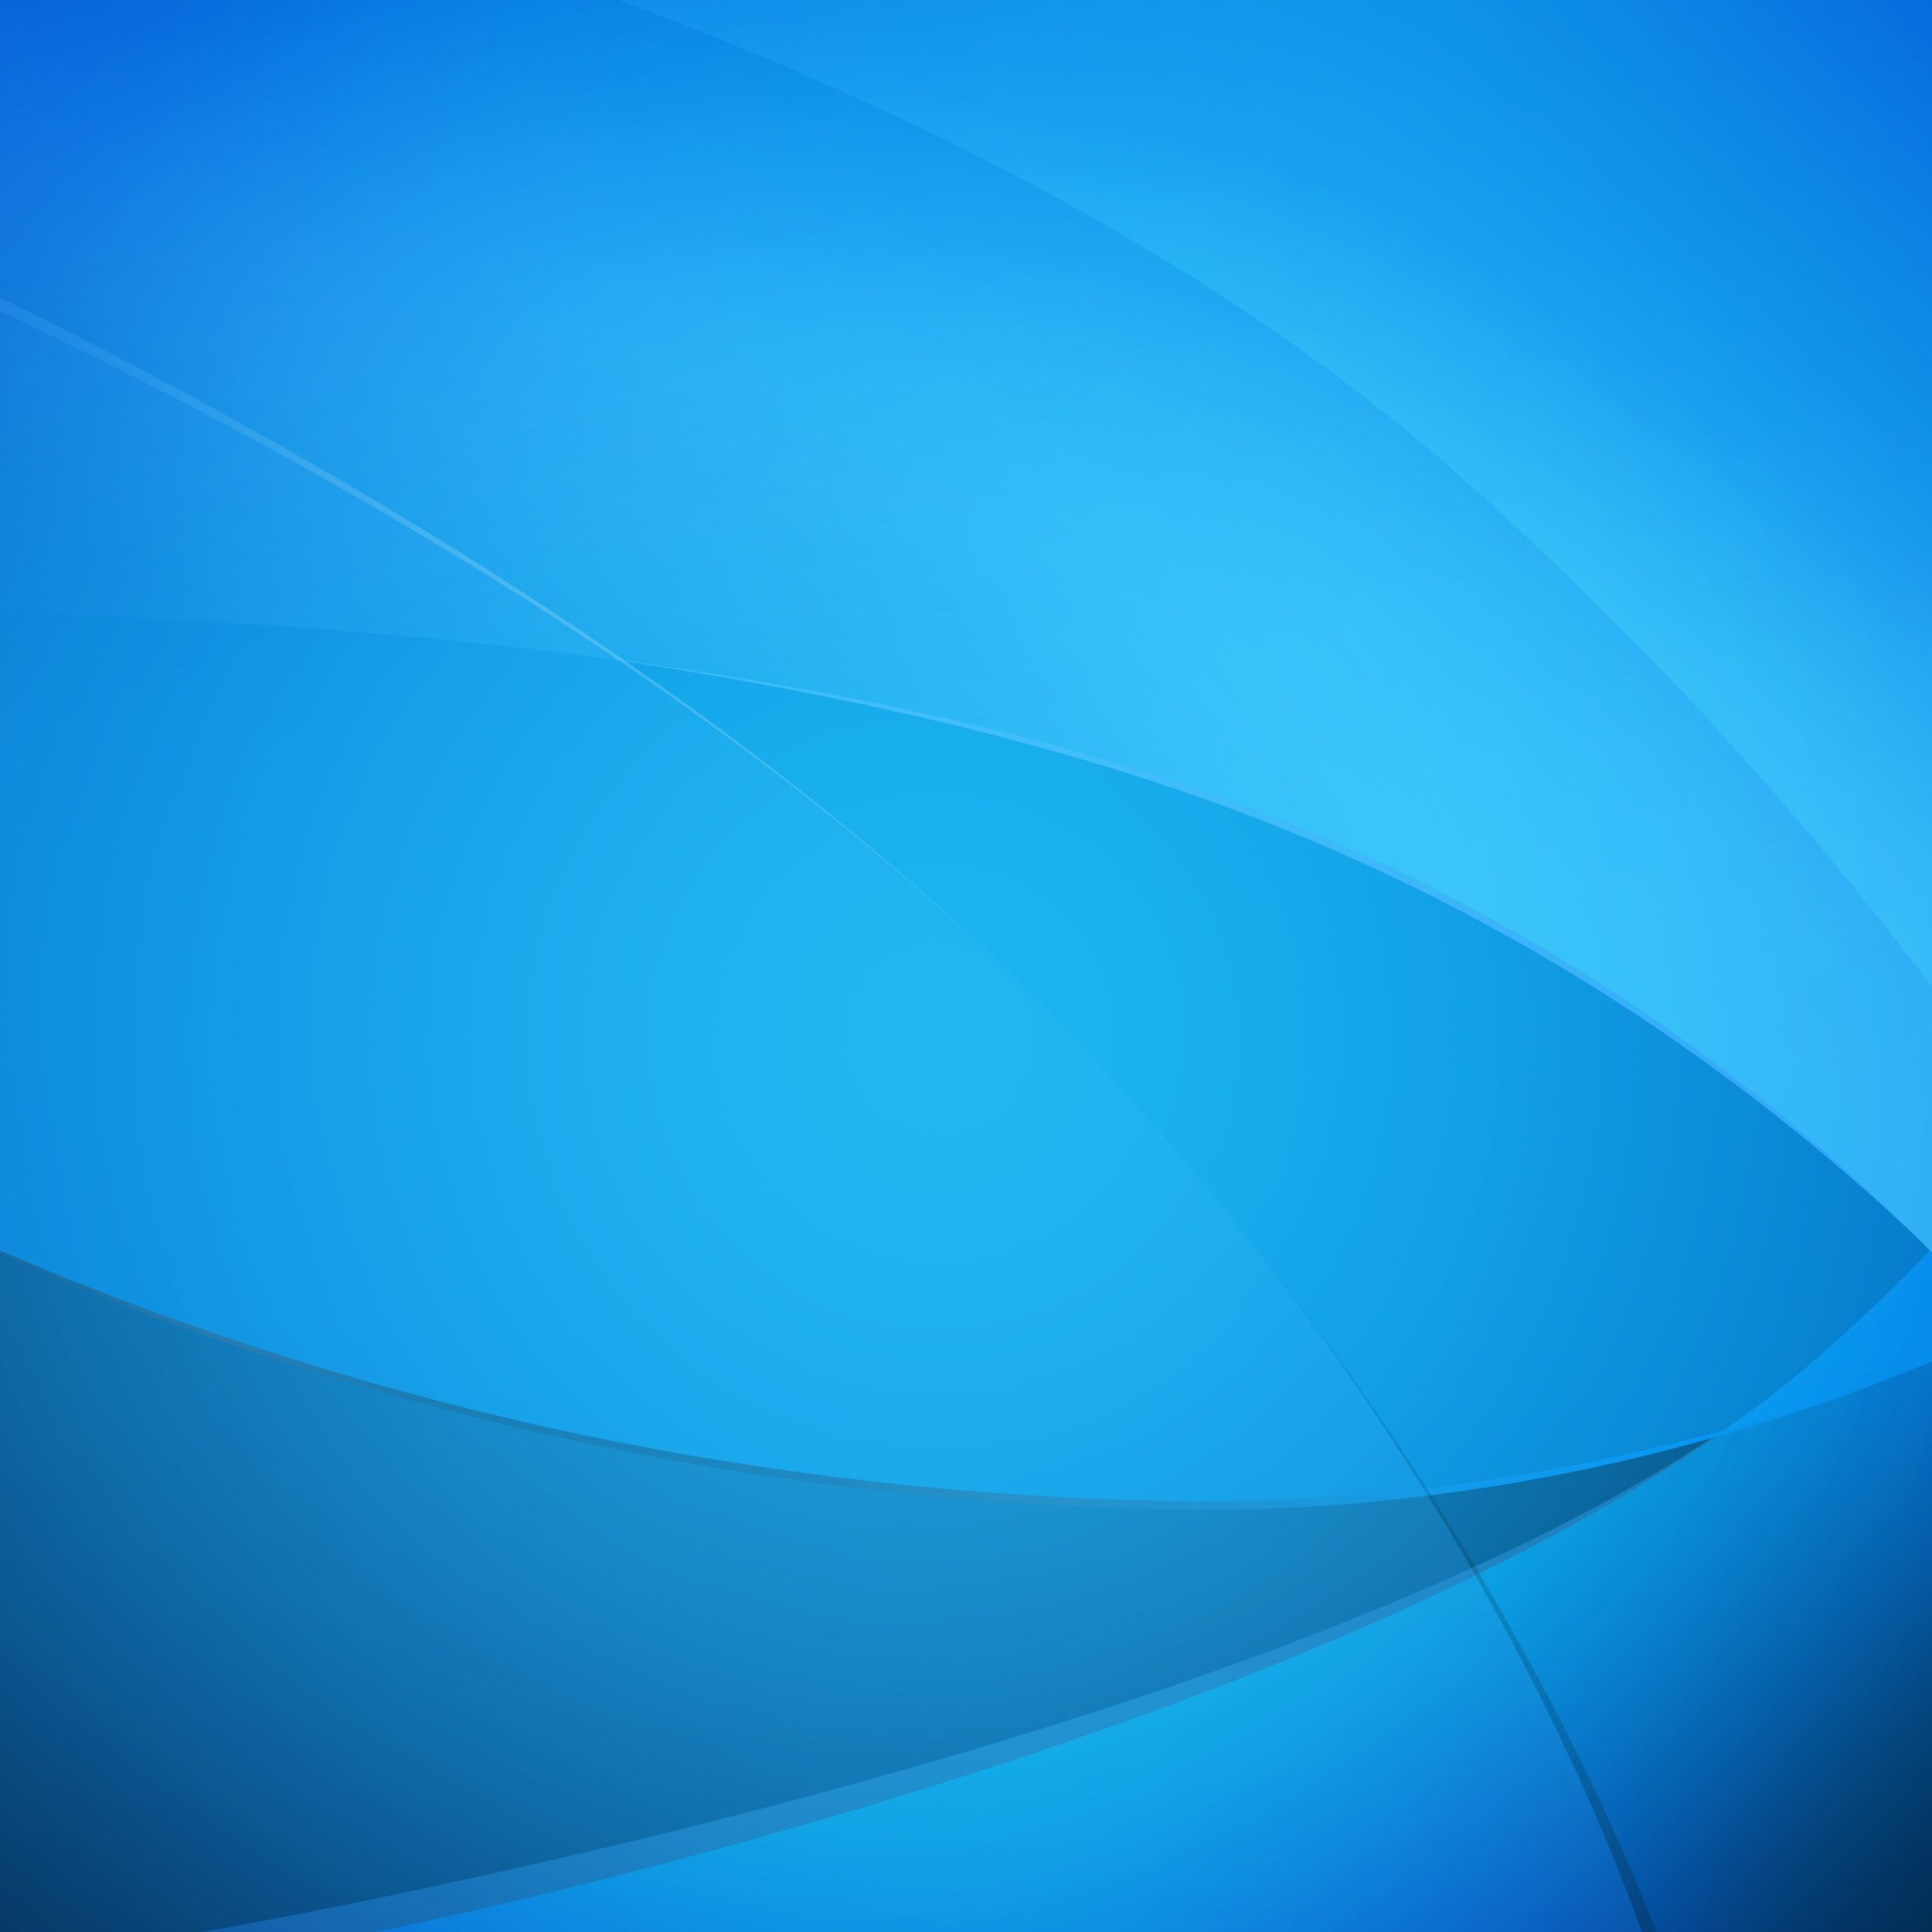 Newest iPad 3 wallpapers Abstract Wallpapers Blue Color 2048x2048